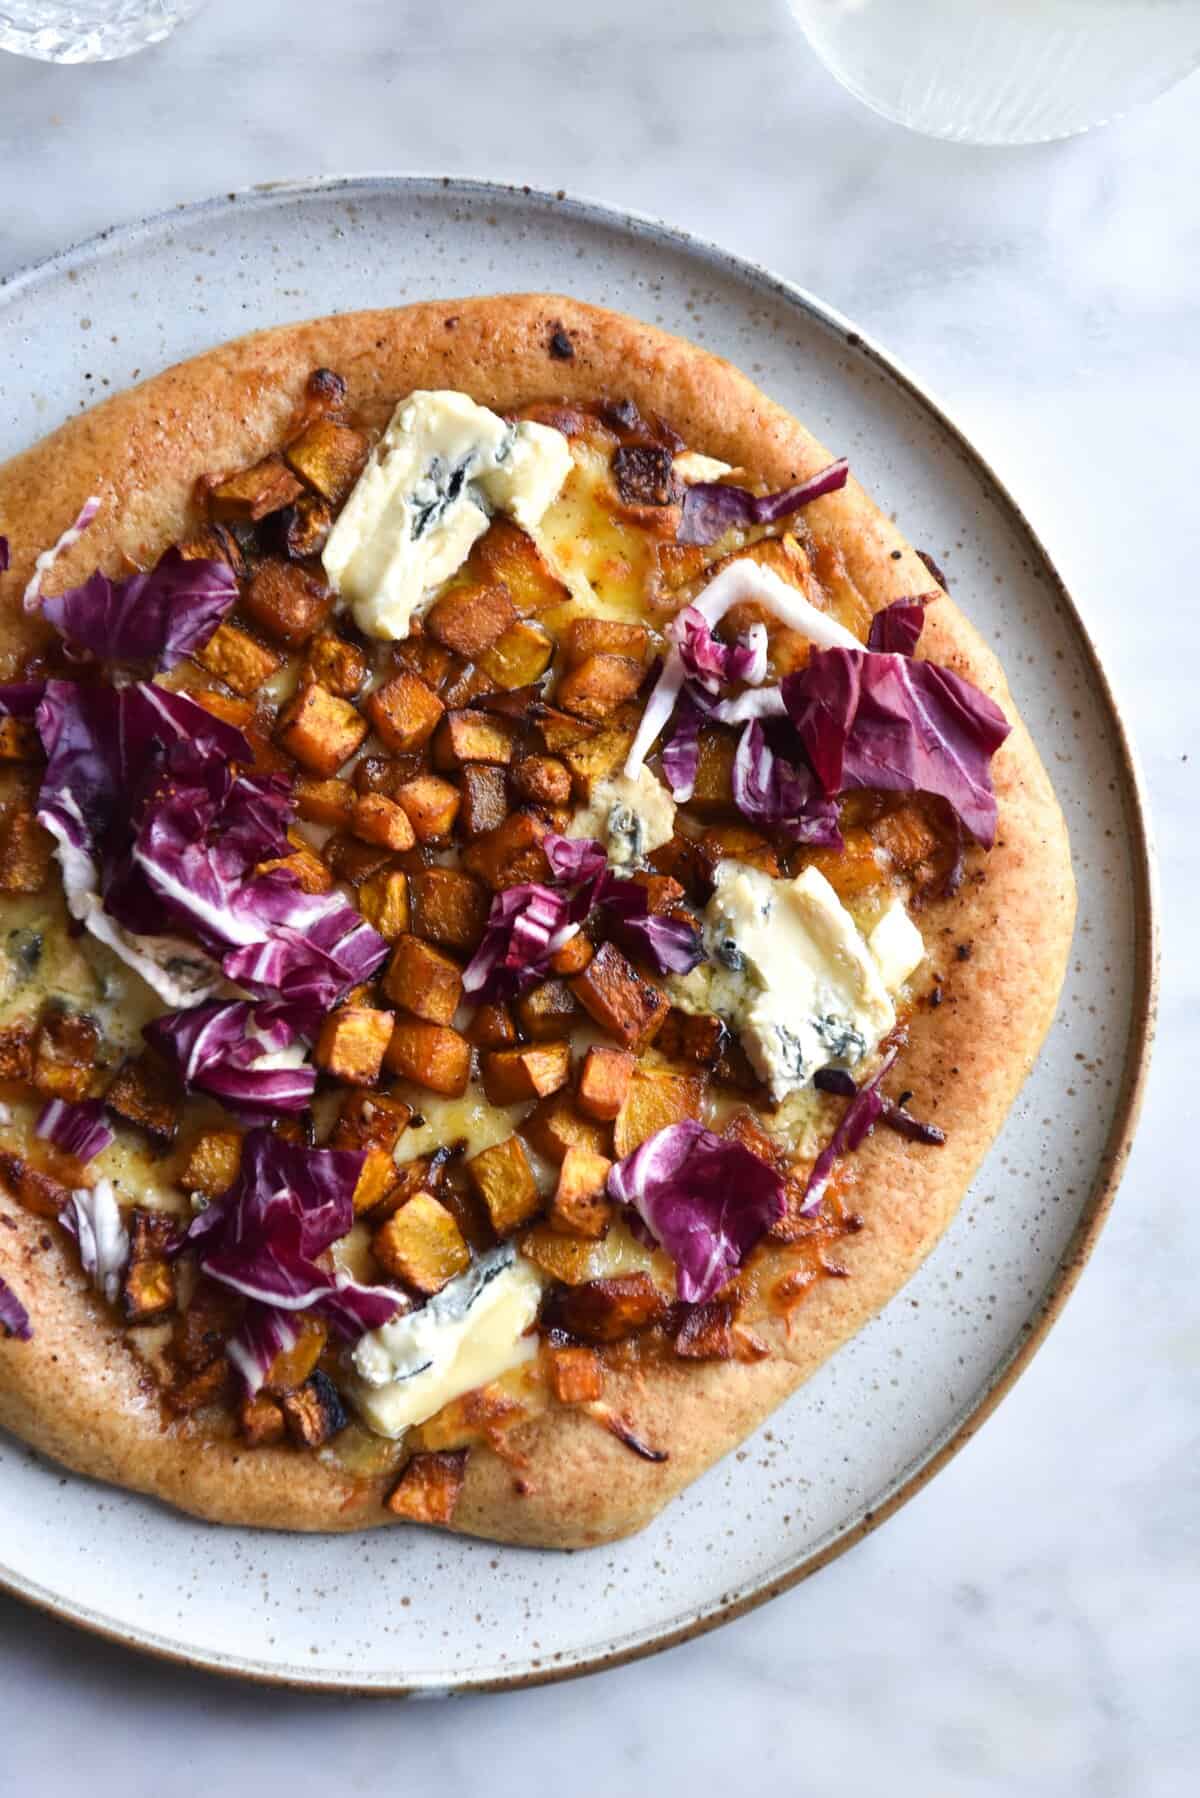 An aerial view of a gluten free pizza base on a white ceramic plate. The pizza is topped with roasted pumpkin, radicchio, blue cheese and a white pizza base.